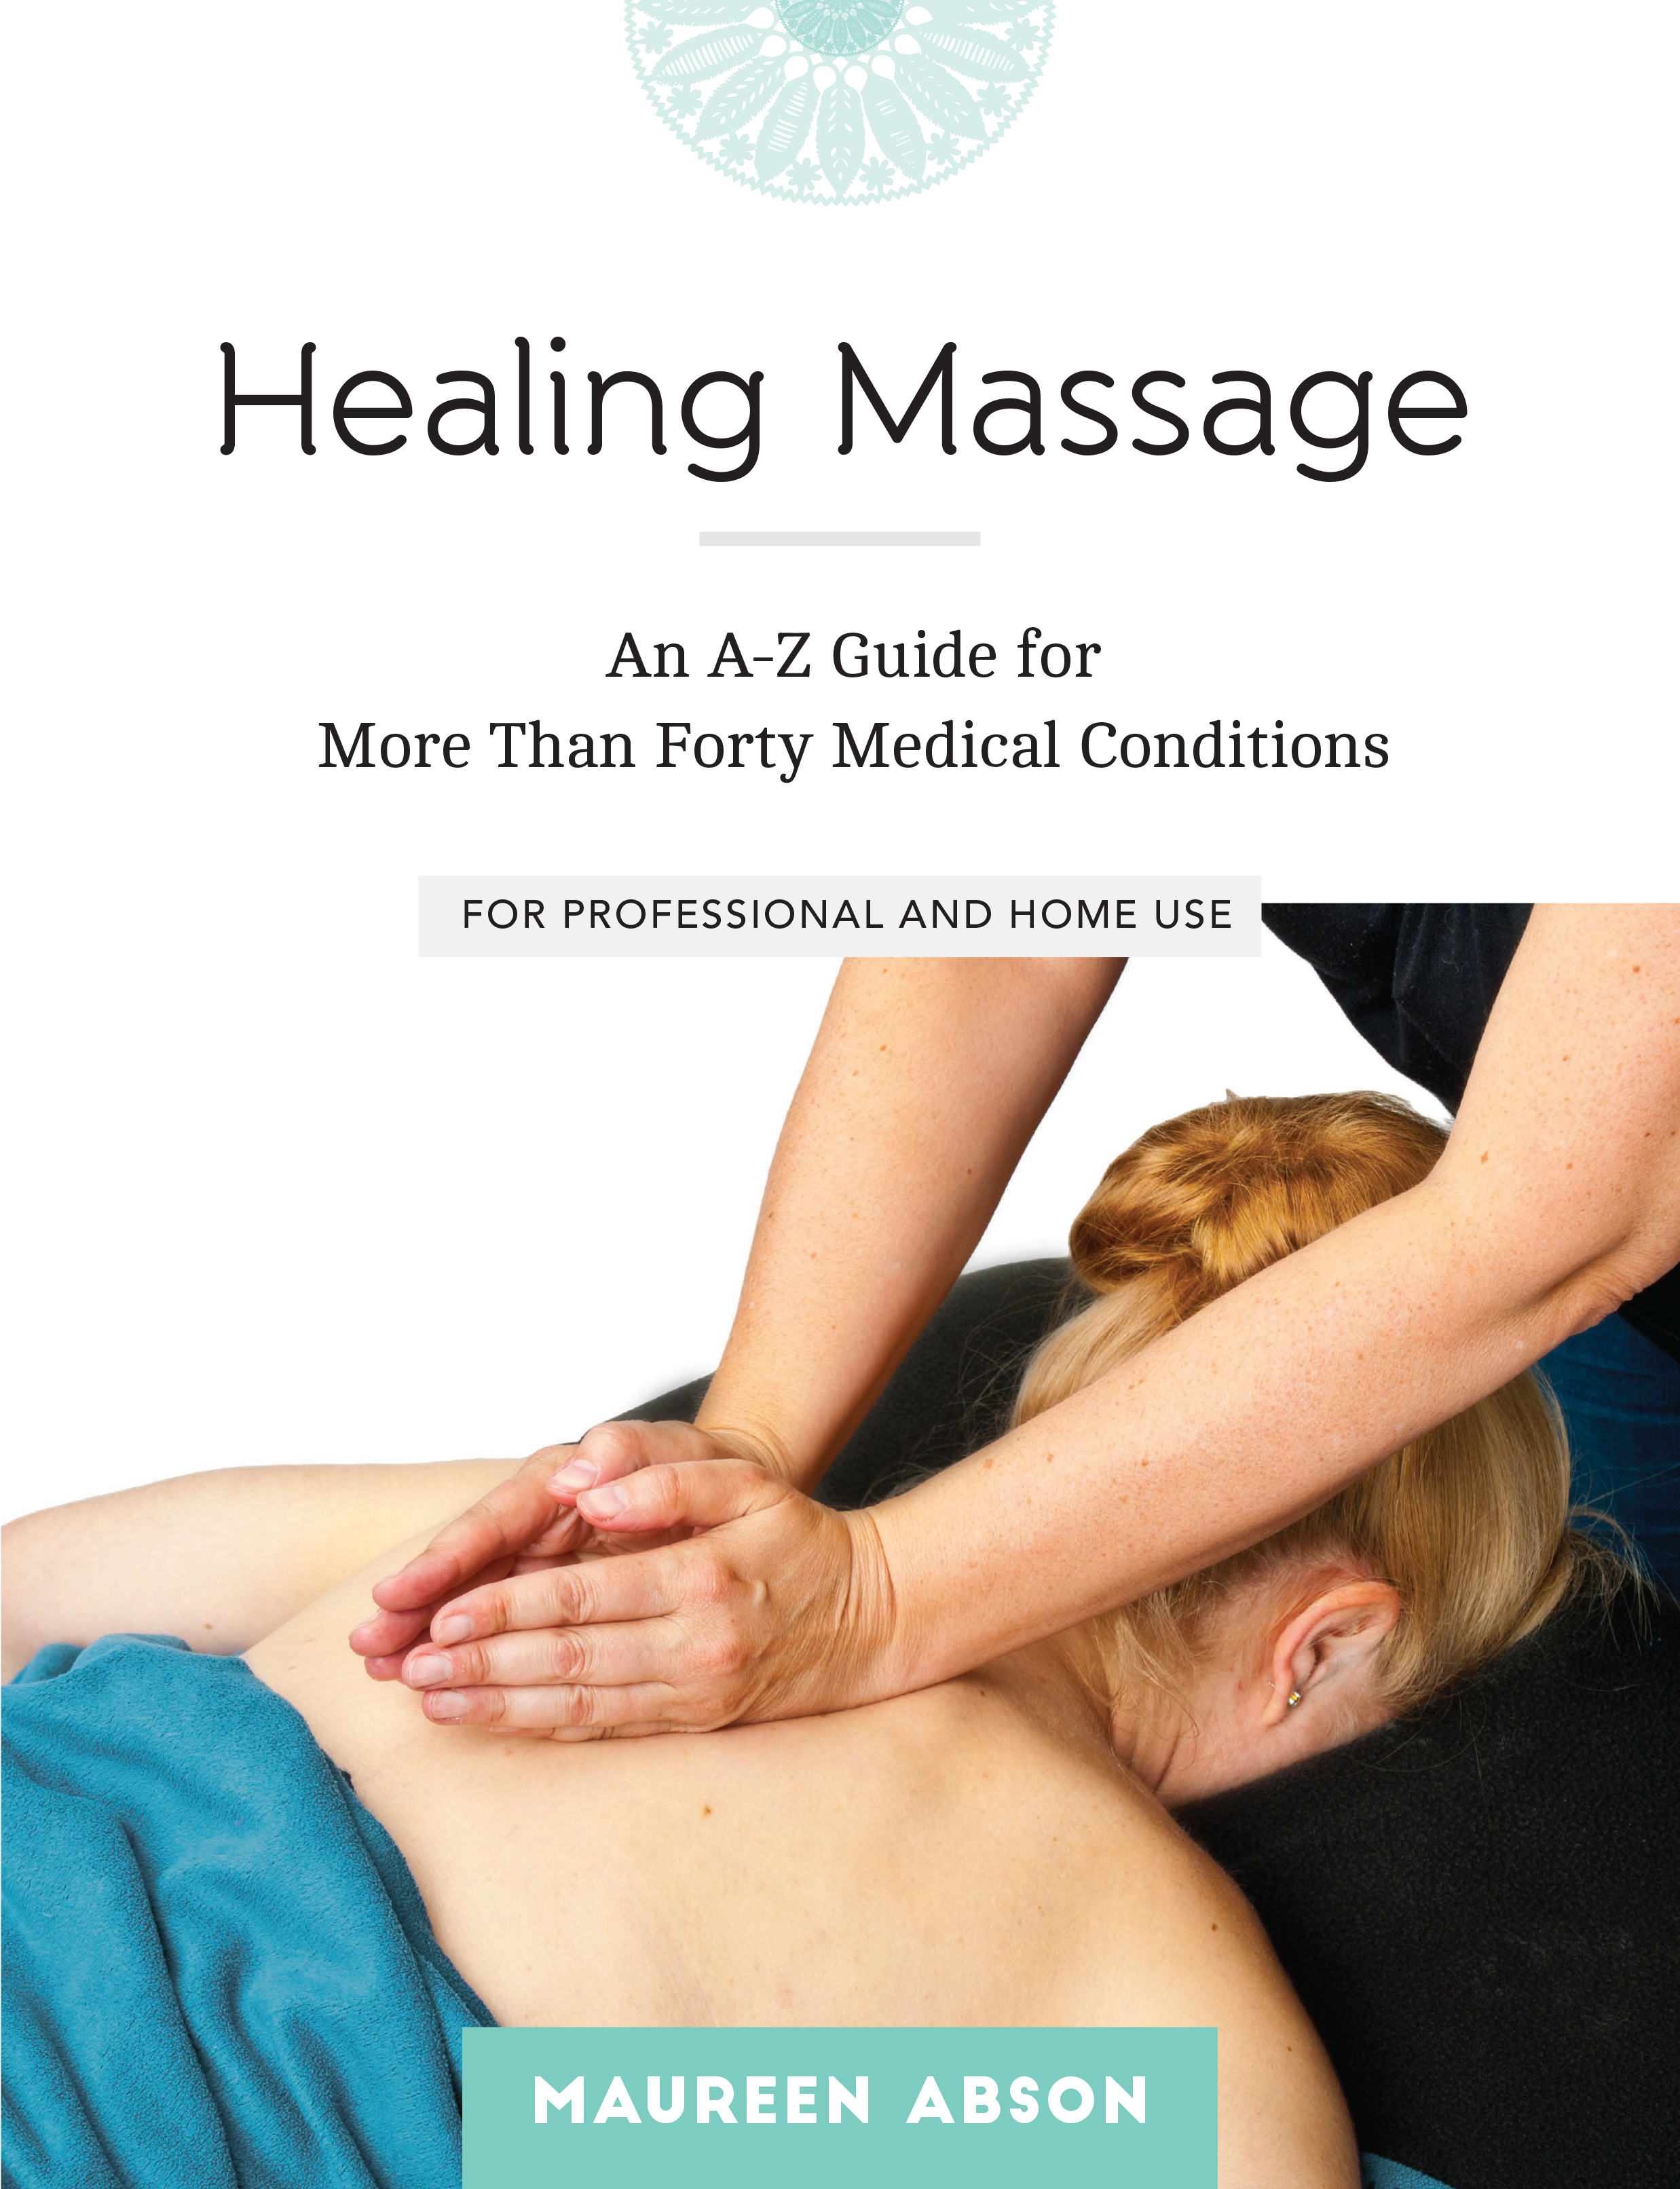 New Release – Healing Massage: An A-Z Guide for More than Forty Medical Conditions for Professional and Home Use